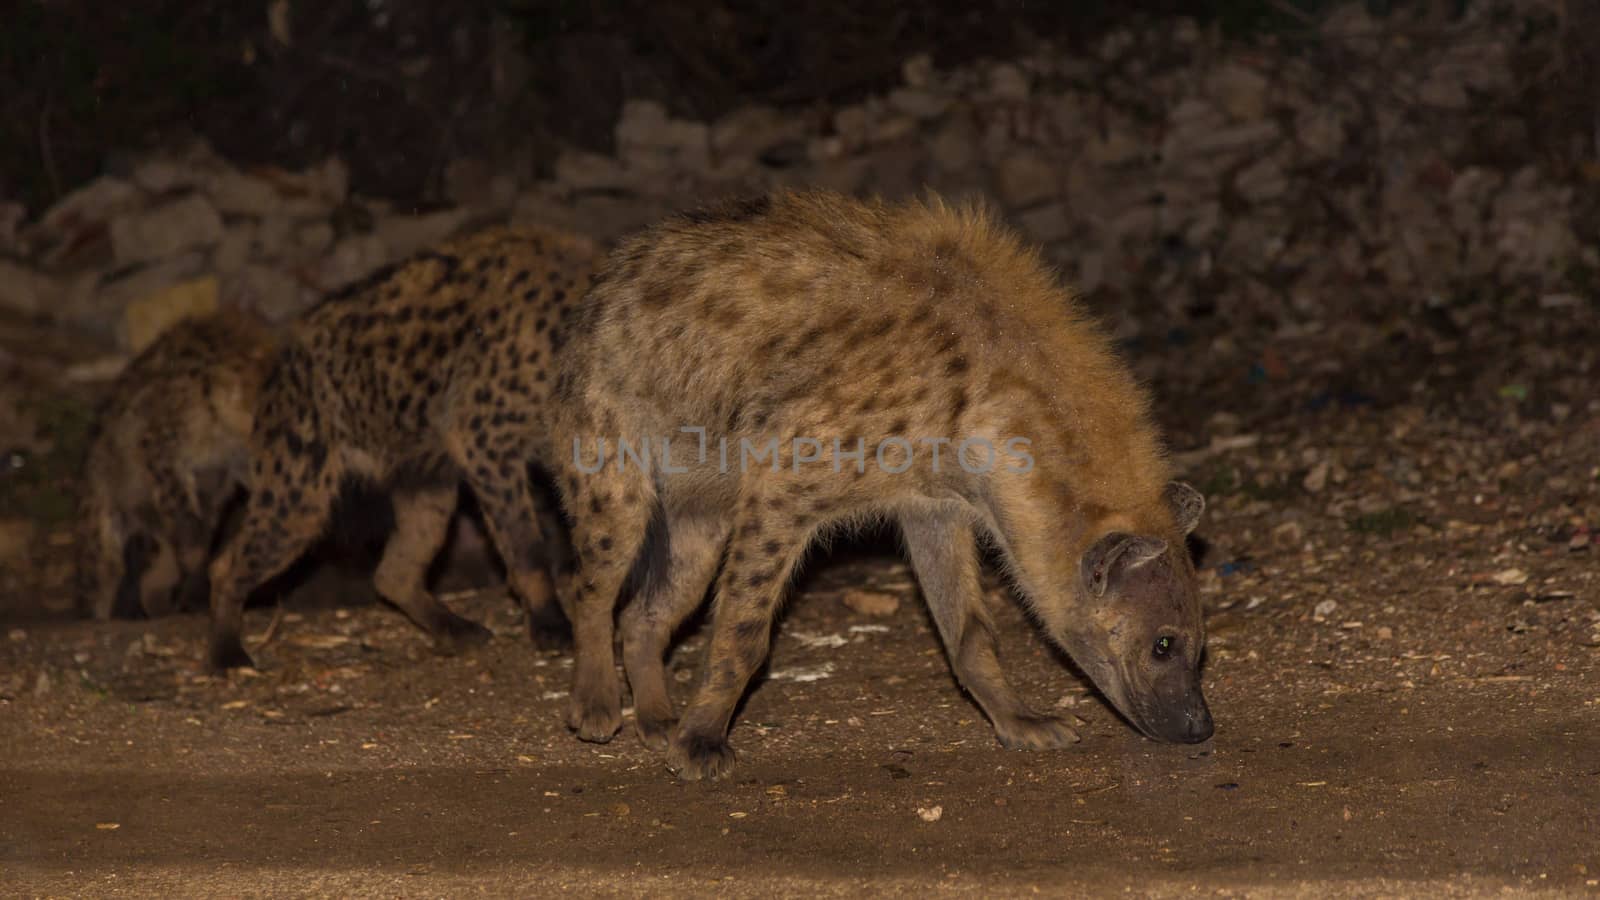 Spotted wild hyenas by derejeb